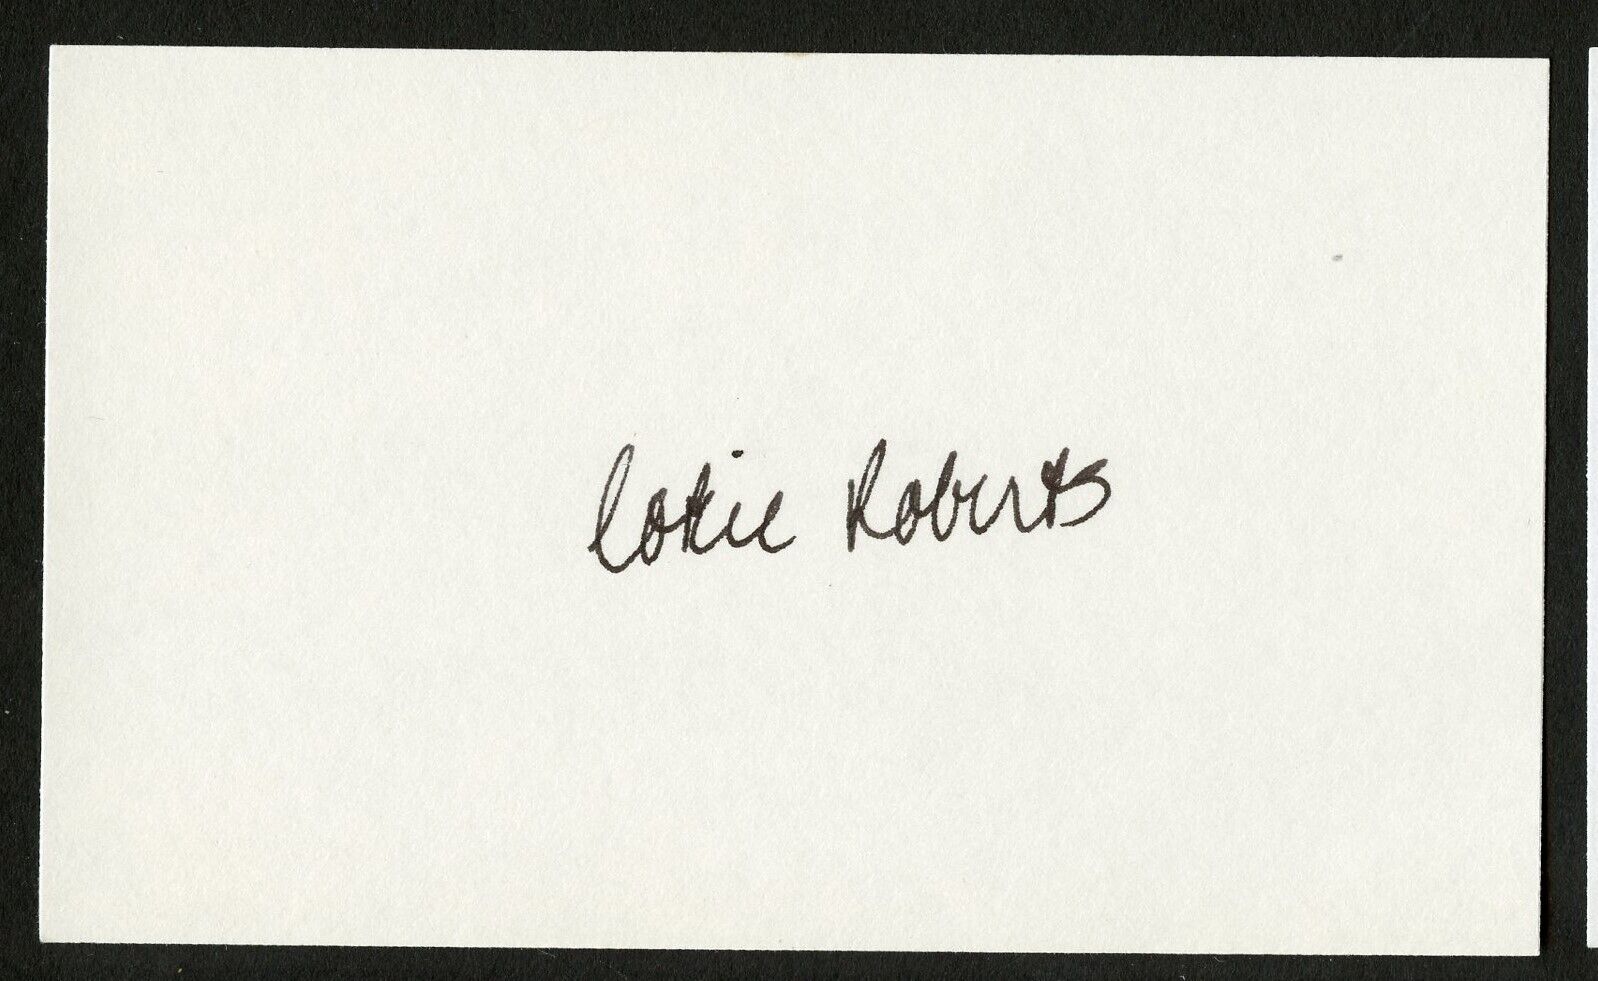 Cokie Roberts d2019 signed autograph auto 3x5 Cut American Journalist and Author